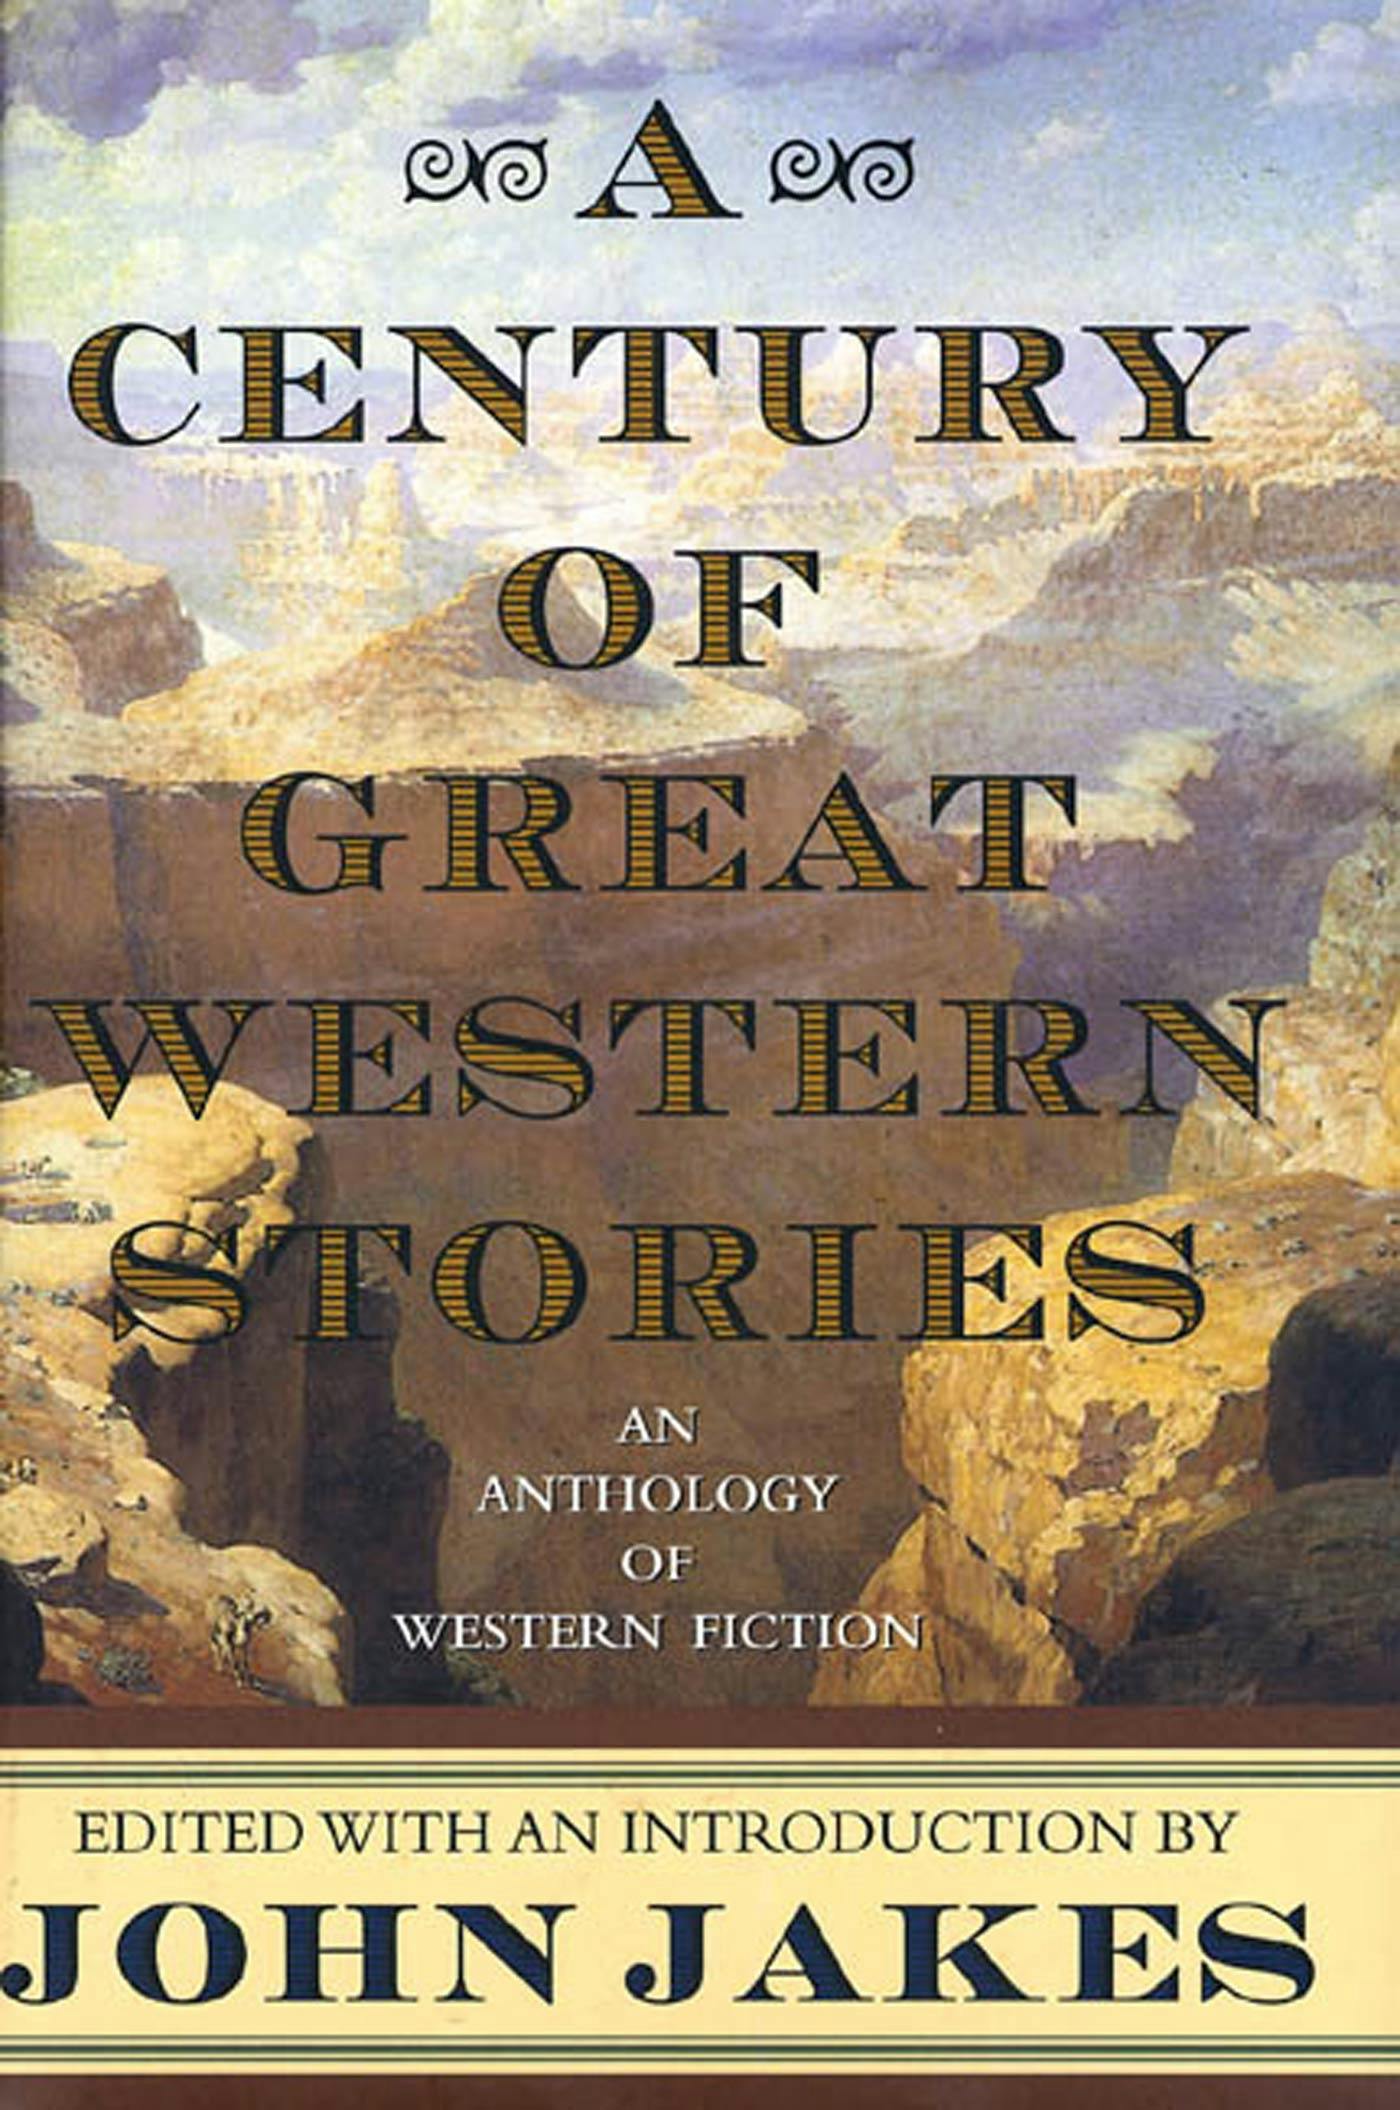 Cover for the book titled as: A Century of Great Western Stories